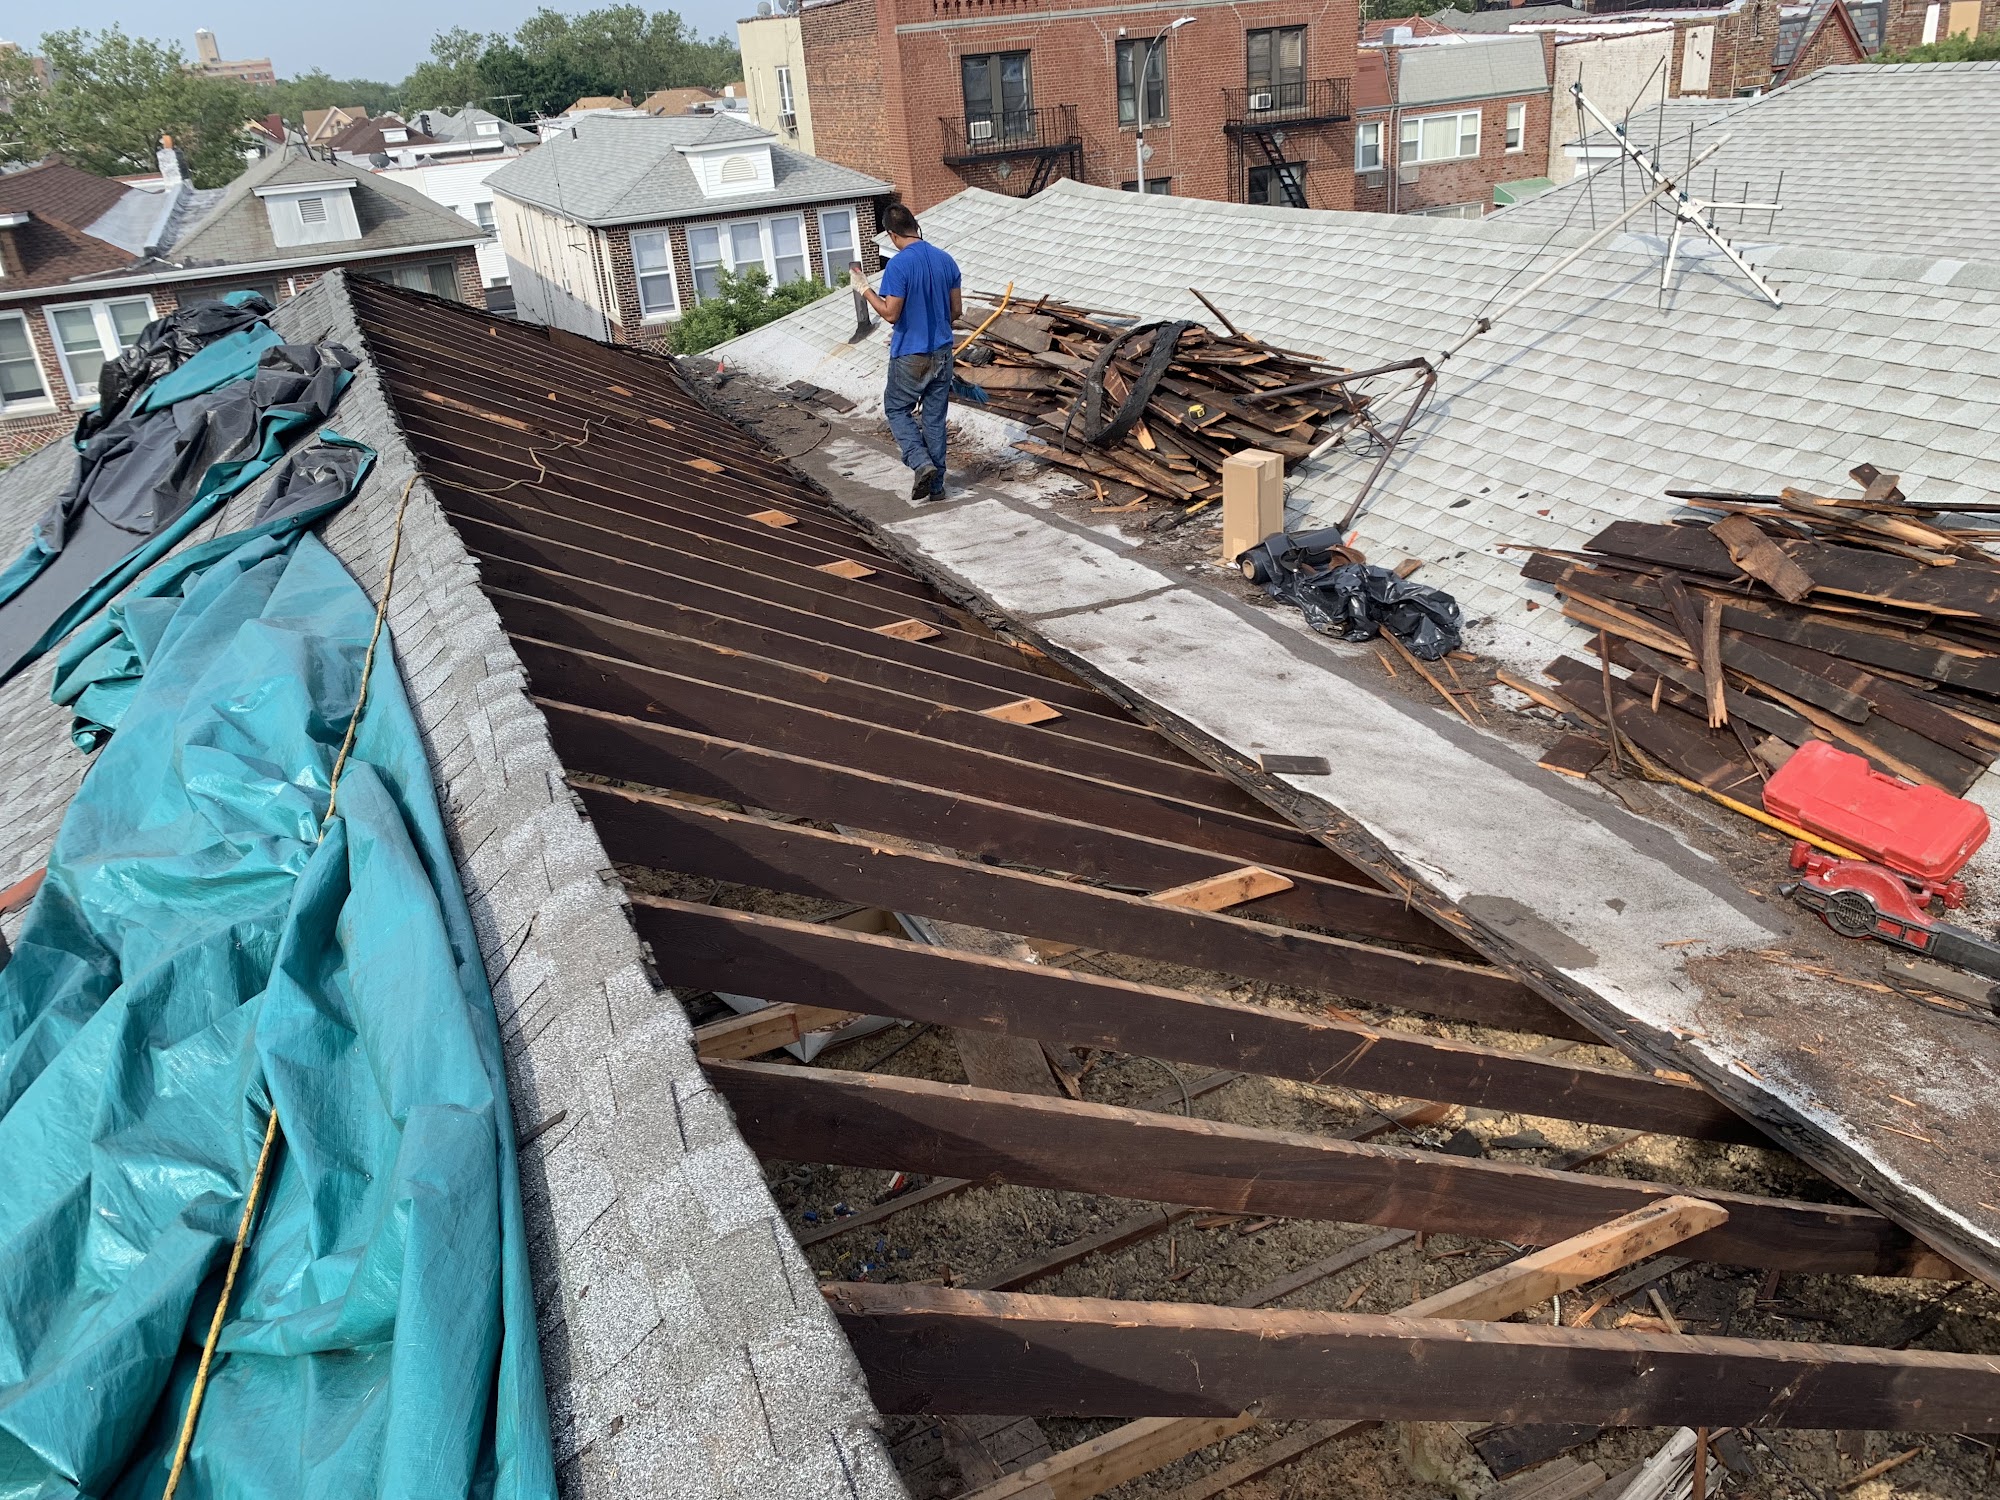 NYC Best Roofing & Siding